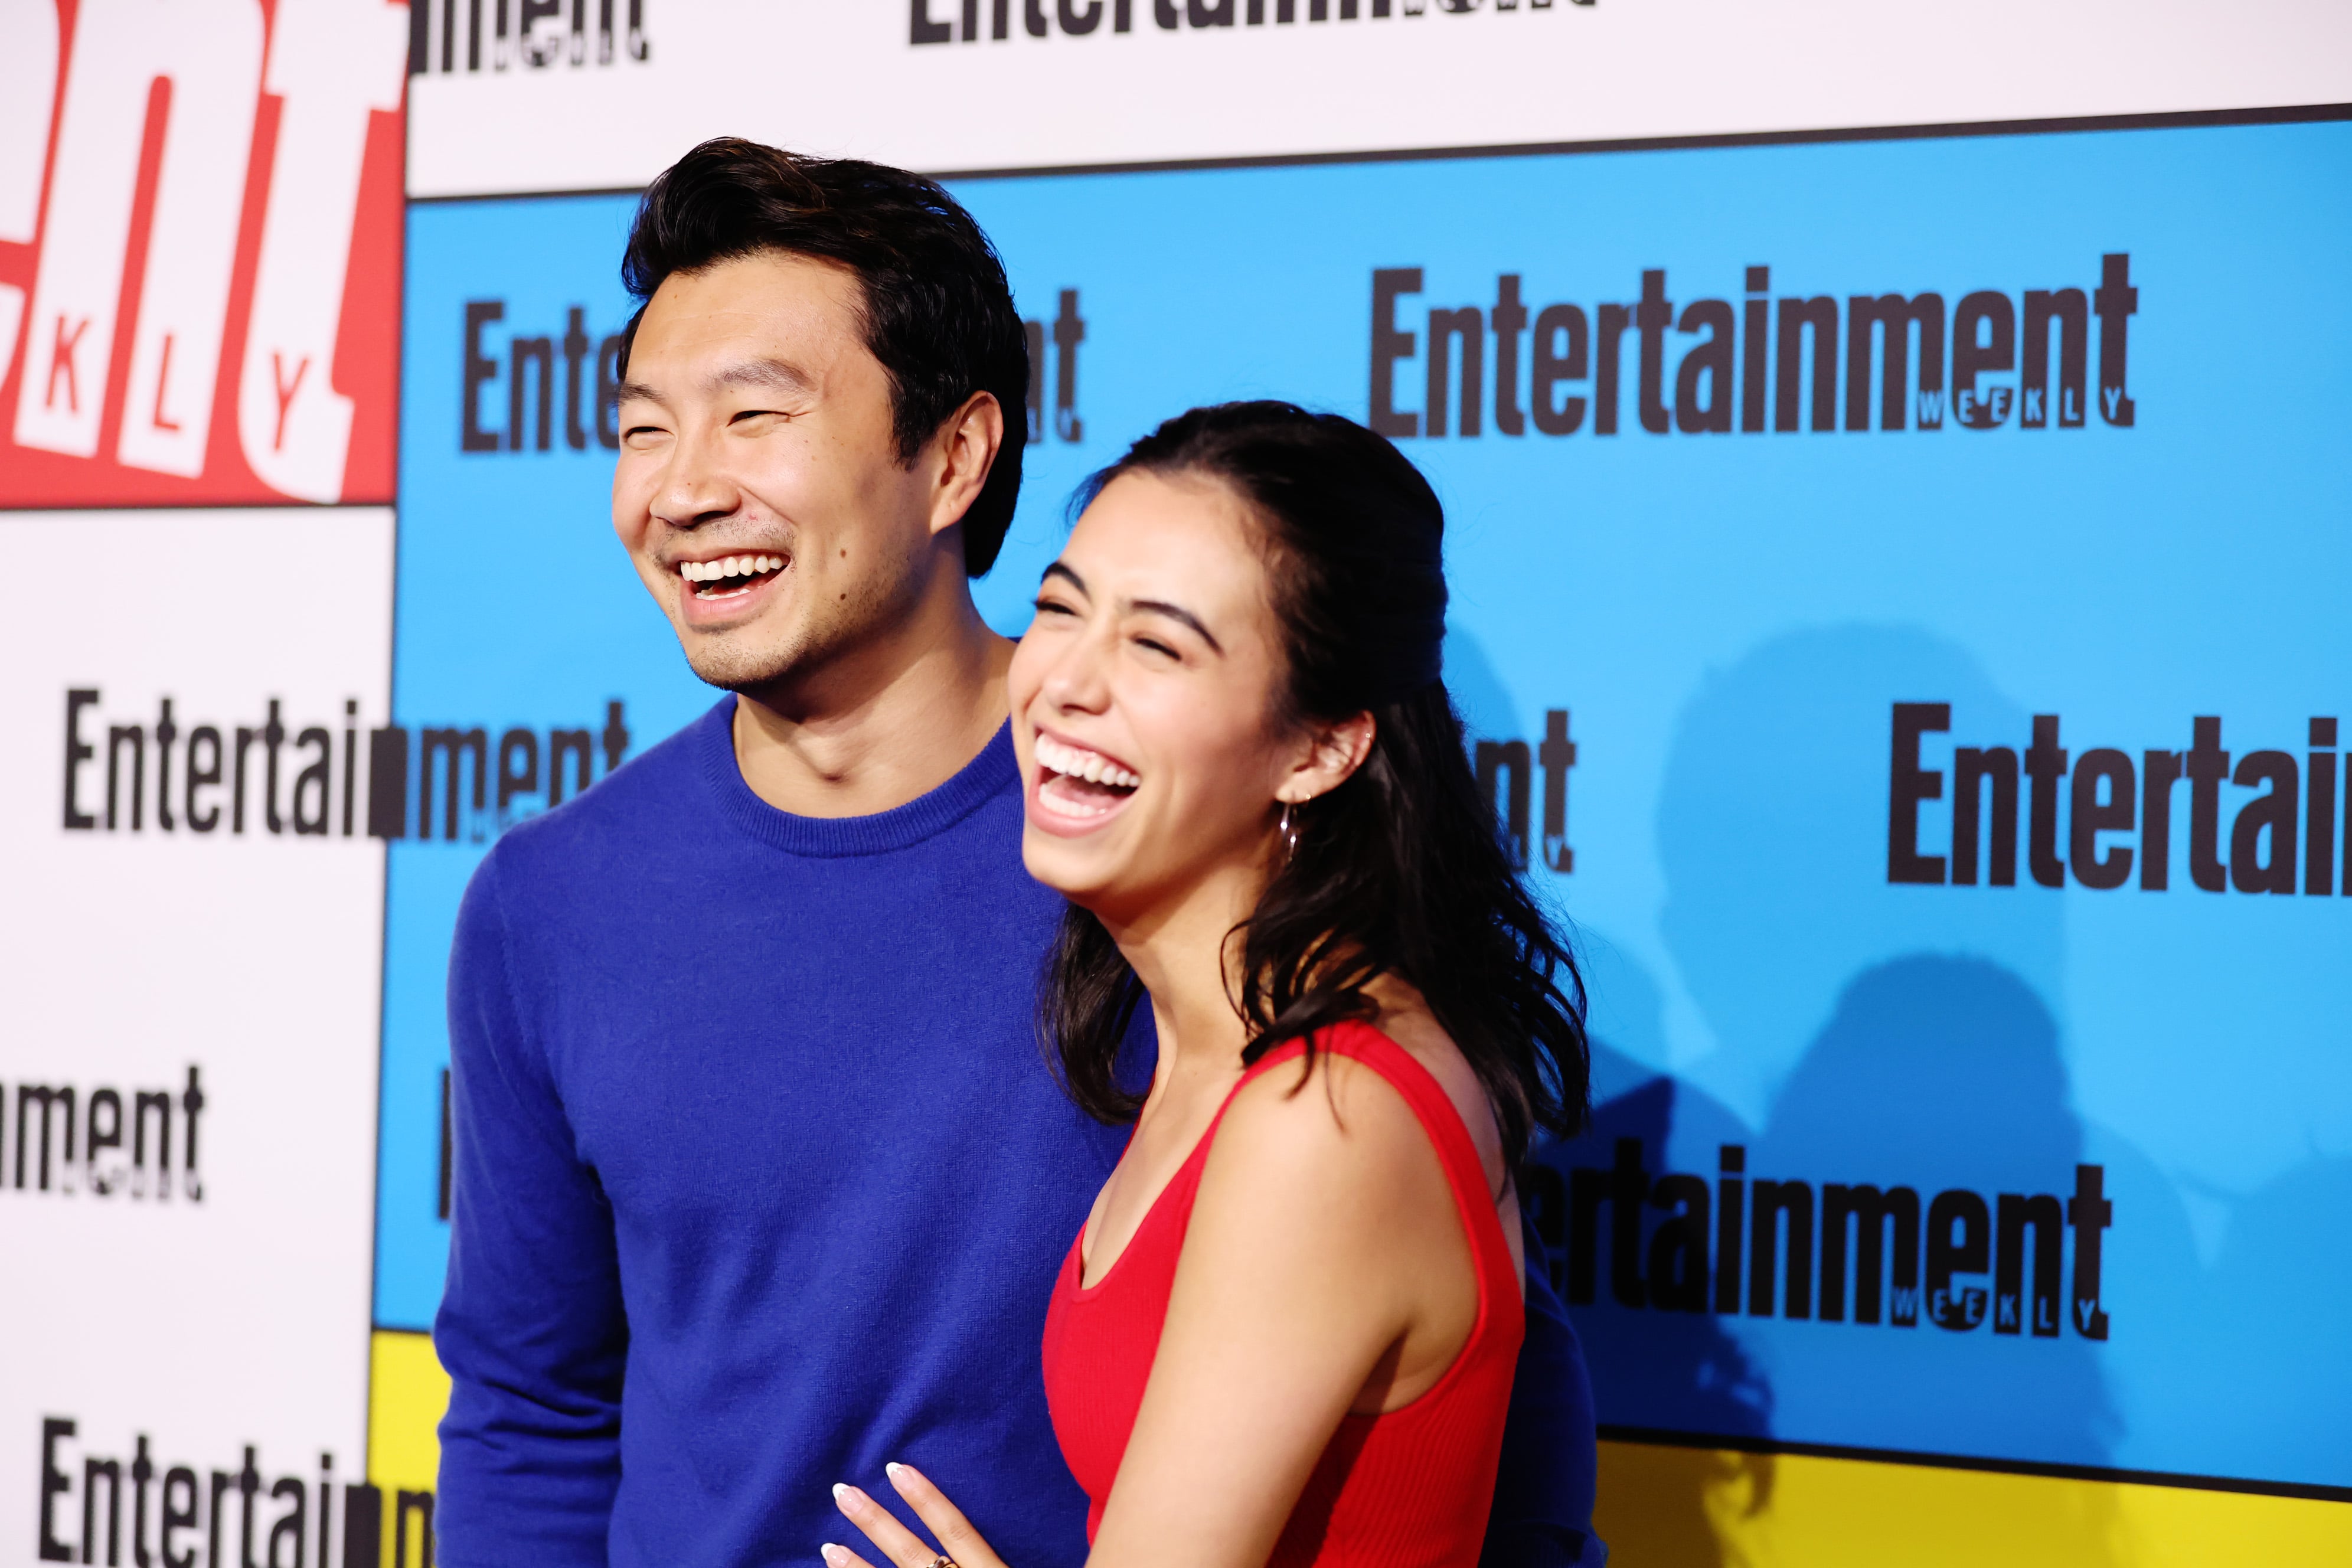 Simu Liu hits up Comic Con with girlfriend days after making red